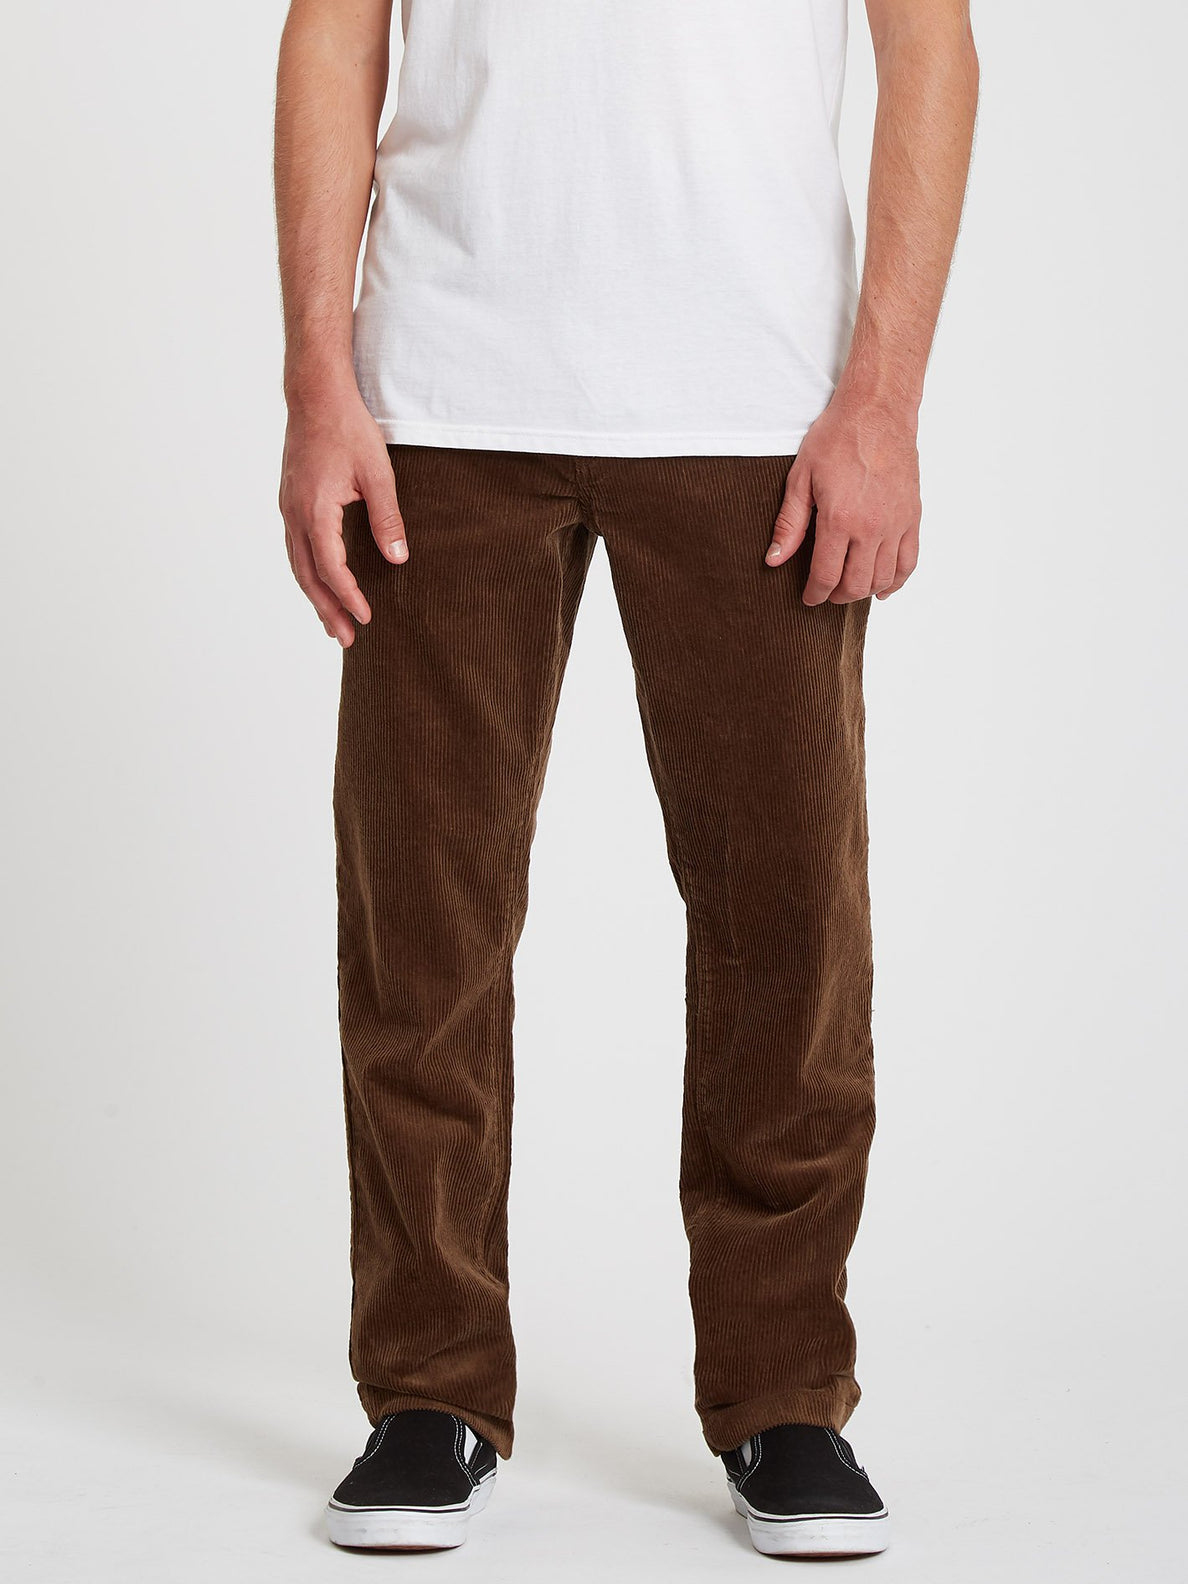 Louie Lopez Tapered Cord Pant - DARK EARTH (A1132100_DKE) [F]